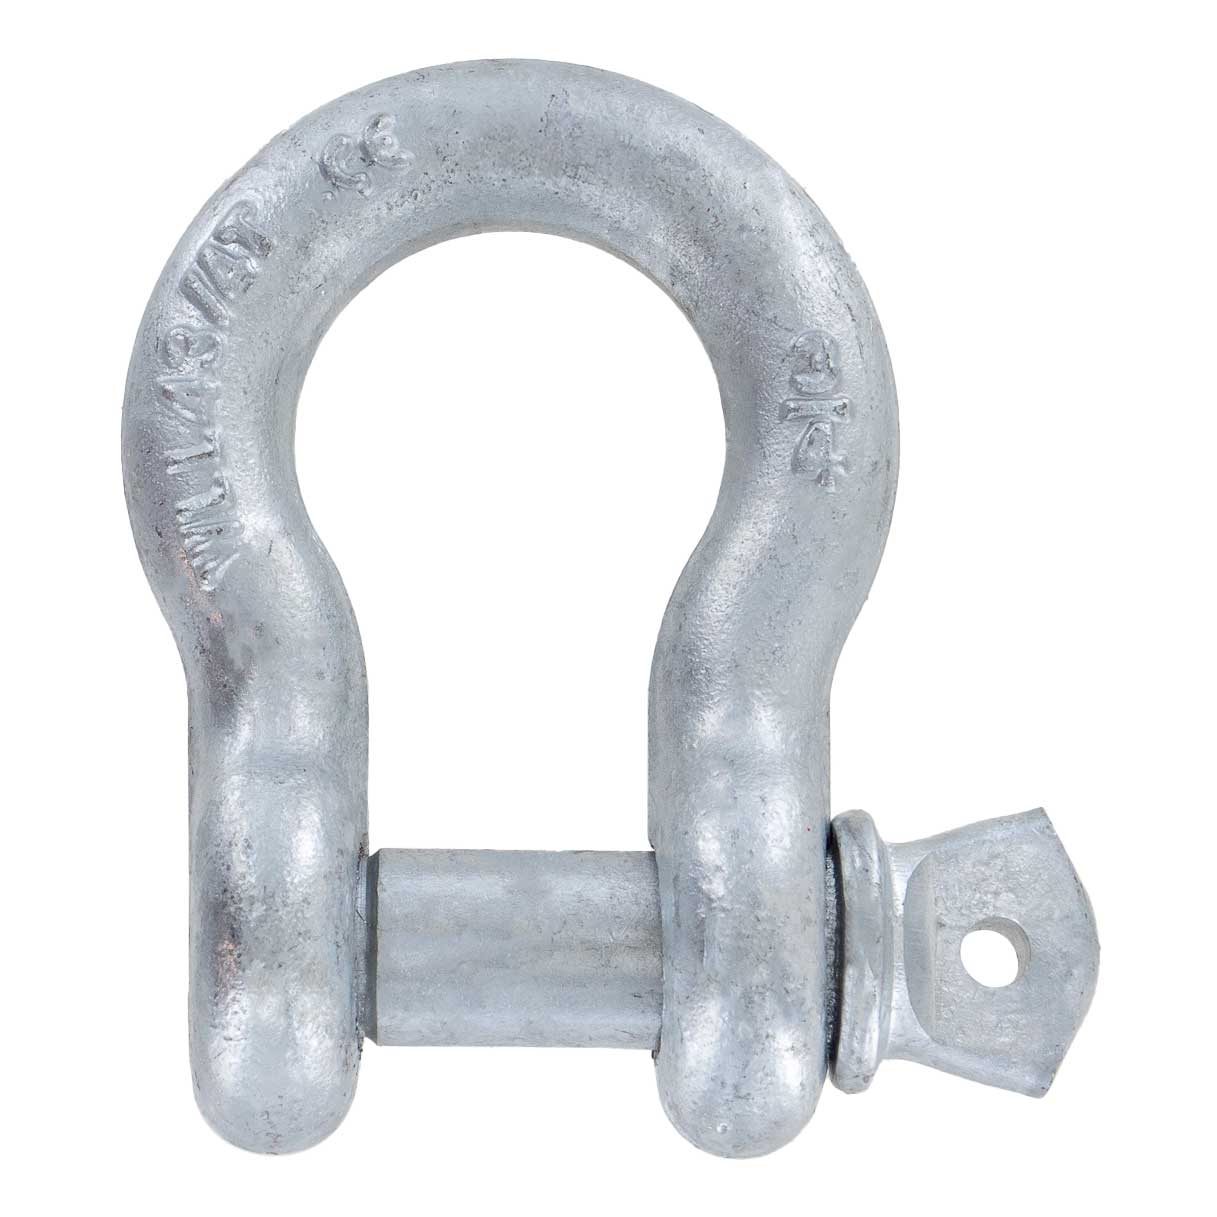 5/16" Galvanized Screw Pin Anchor Shackle - 0.75 Ton primary image